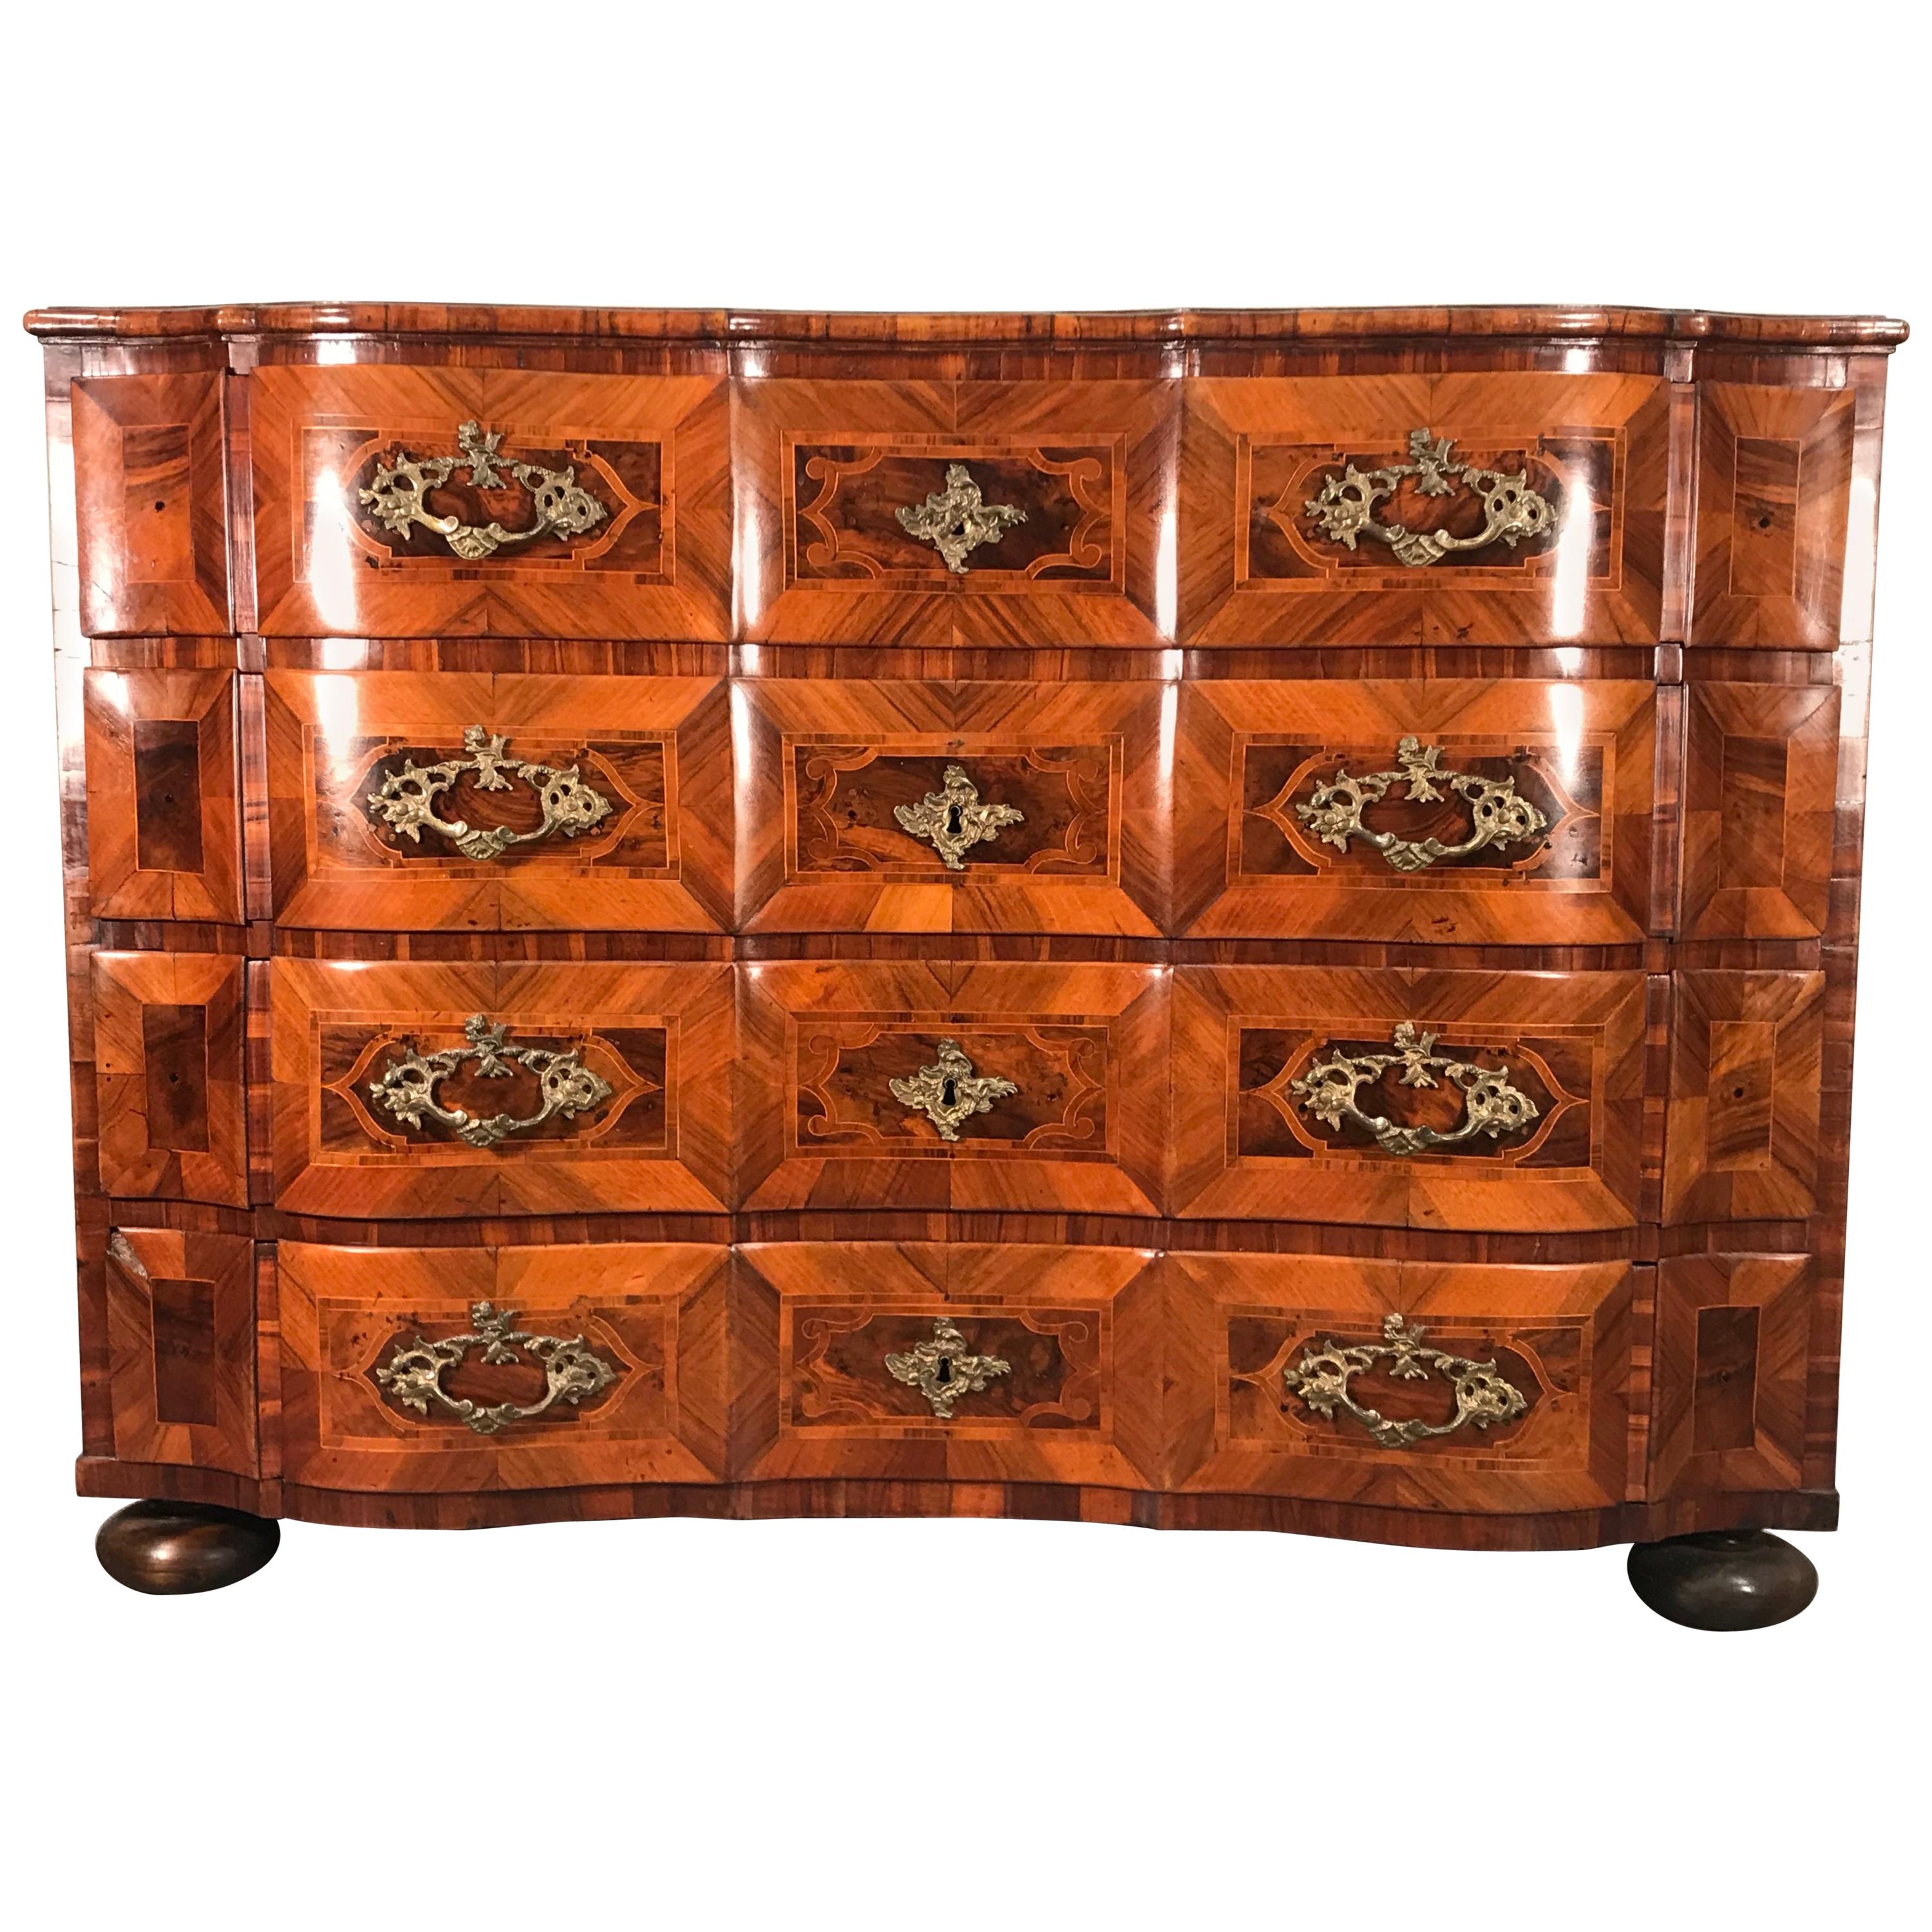 Baroque Chest of Drawers, Southern Germany 1750, Walnut